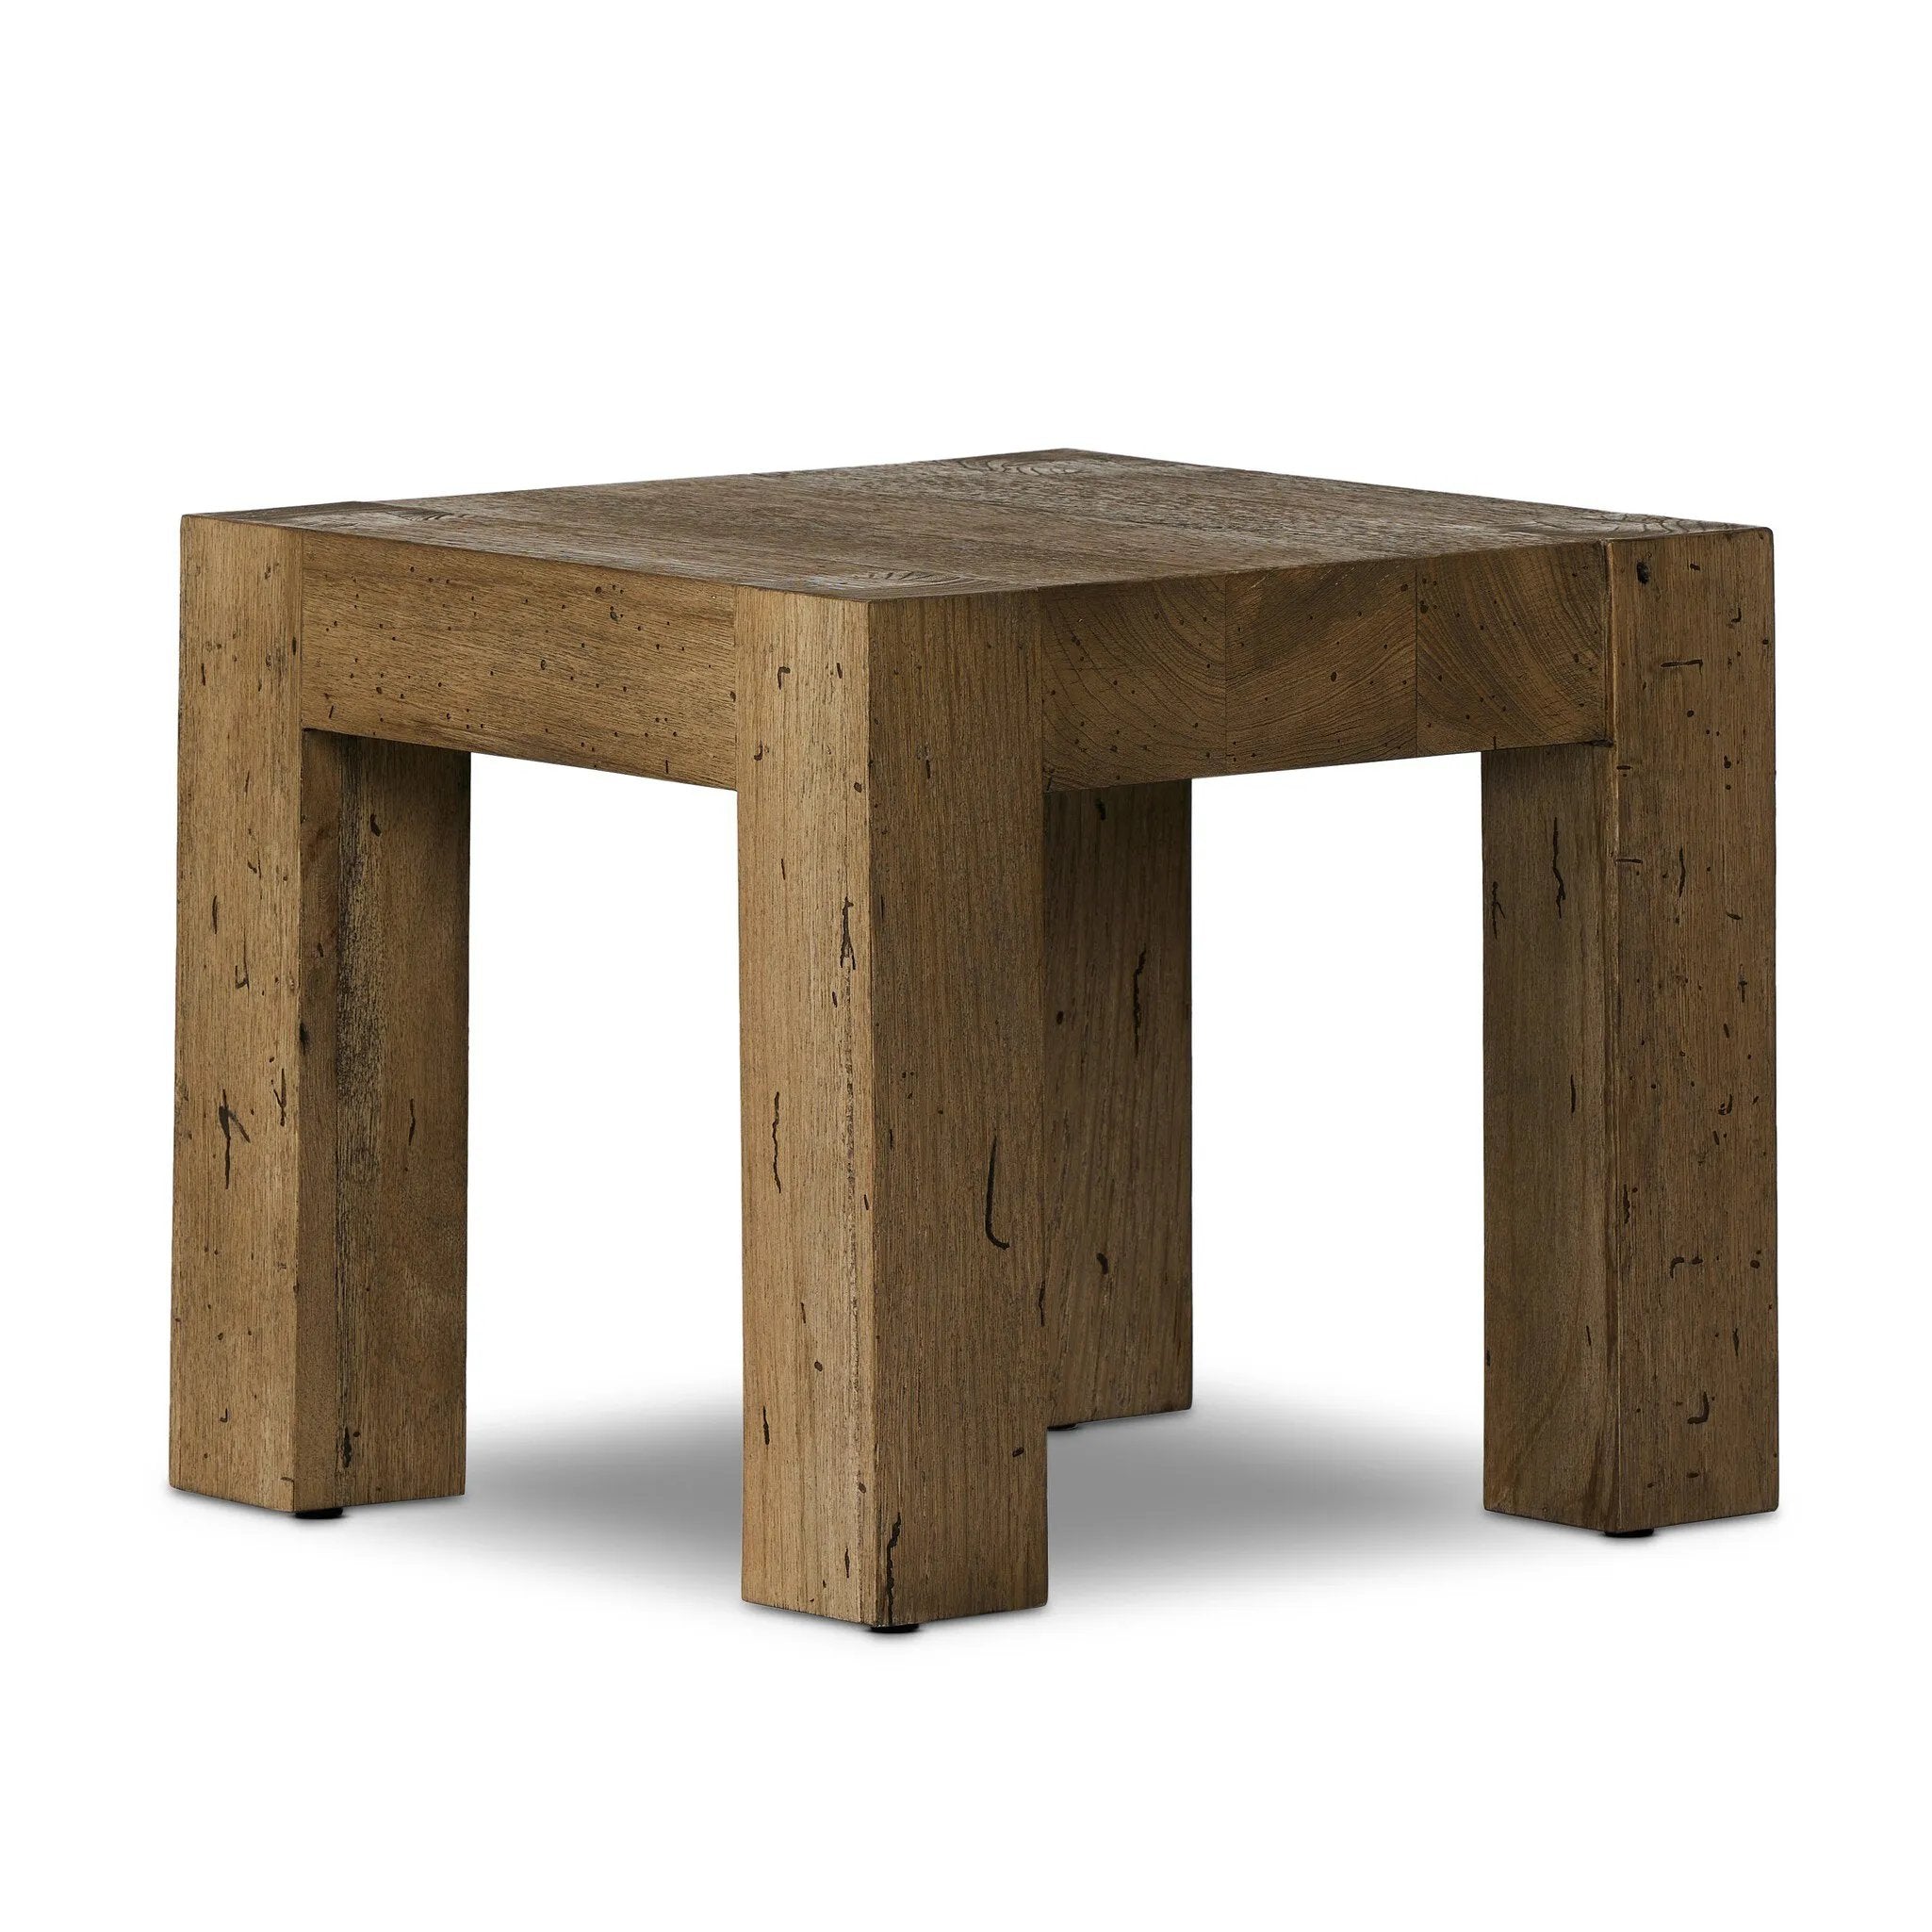 Made from thick-cut oak veneer with a faux rustic finish made to emulate wormwood, this end table features chunky squared legs and dovetail joinery detailing.Collection: Wesso Amethyst Home provides interior design, new home construction design consulting, vintage area rugs, and lighting in the Winter Garden metro area.